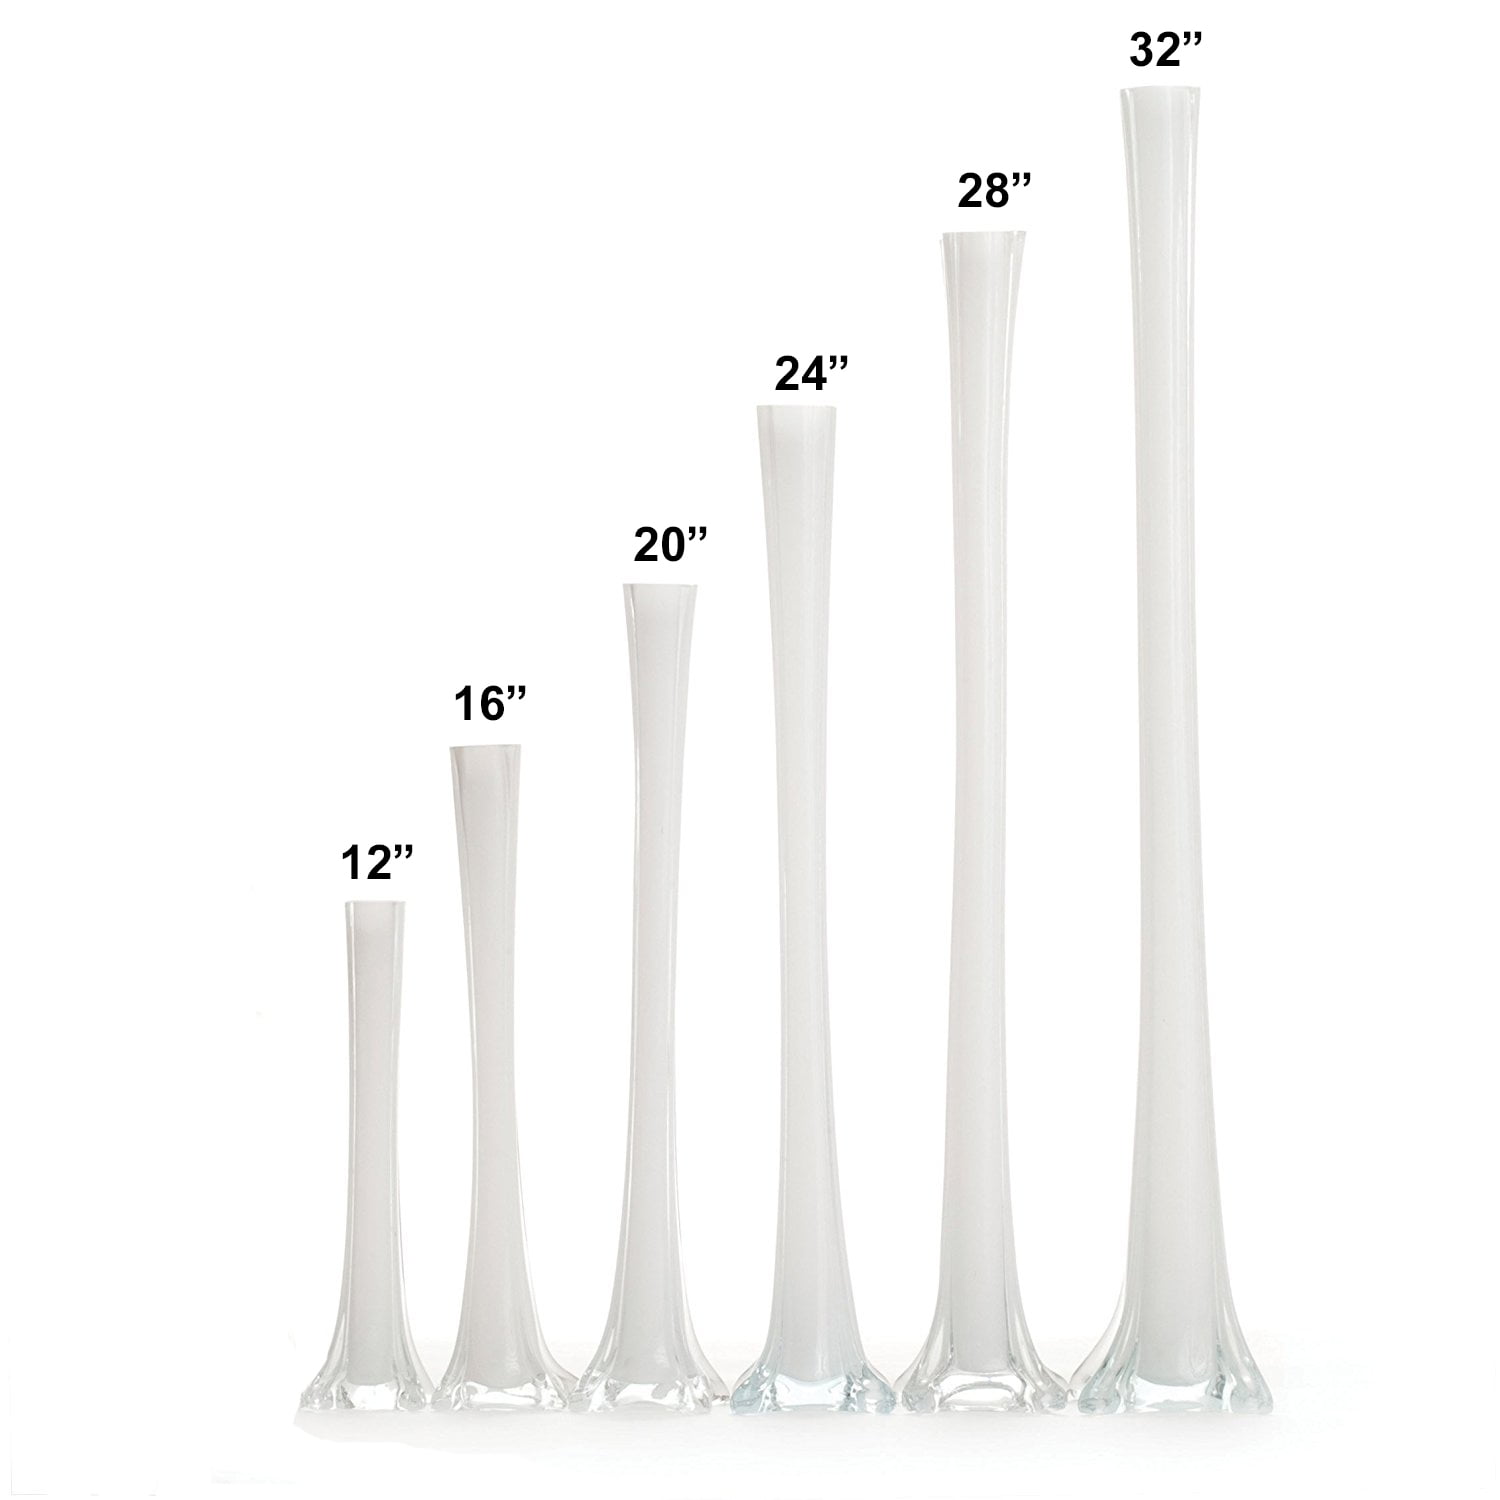 16 oz. wt. Tall Glass Cylinders (12/case) [CY-16]